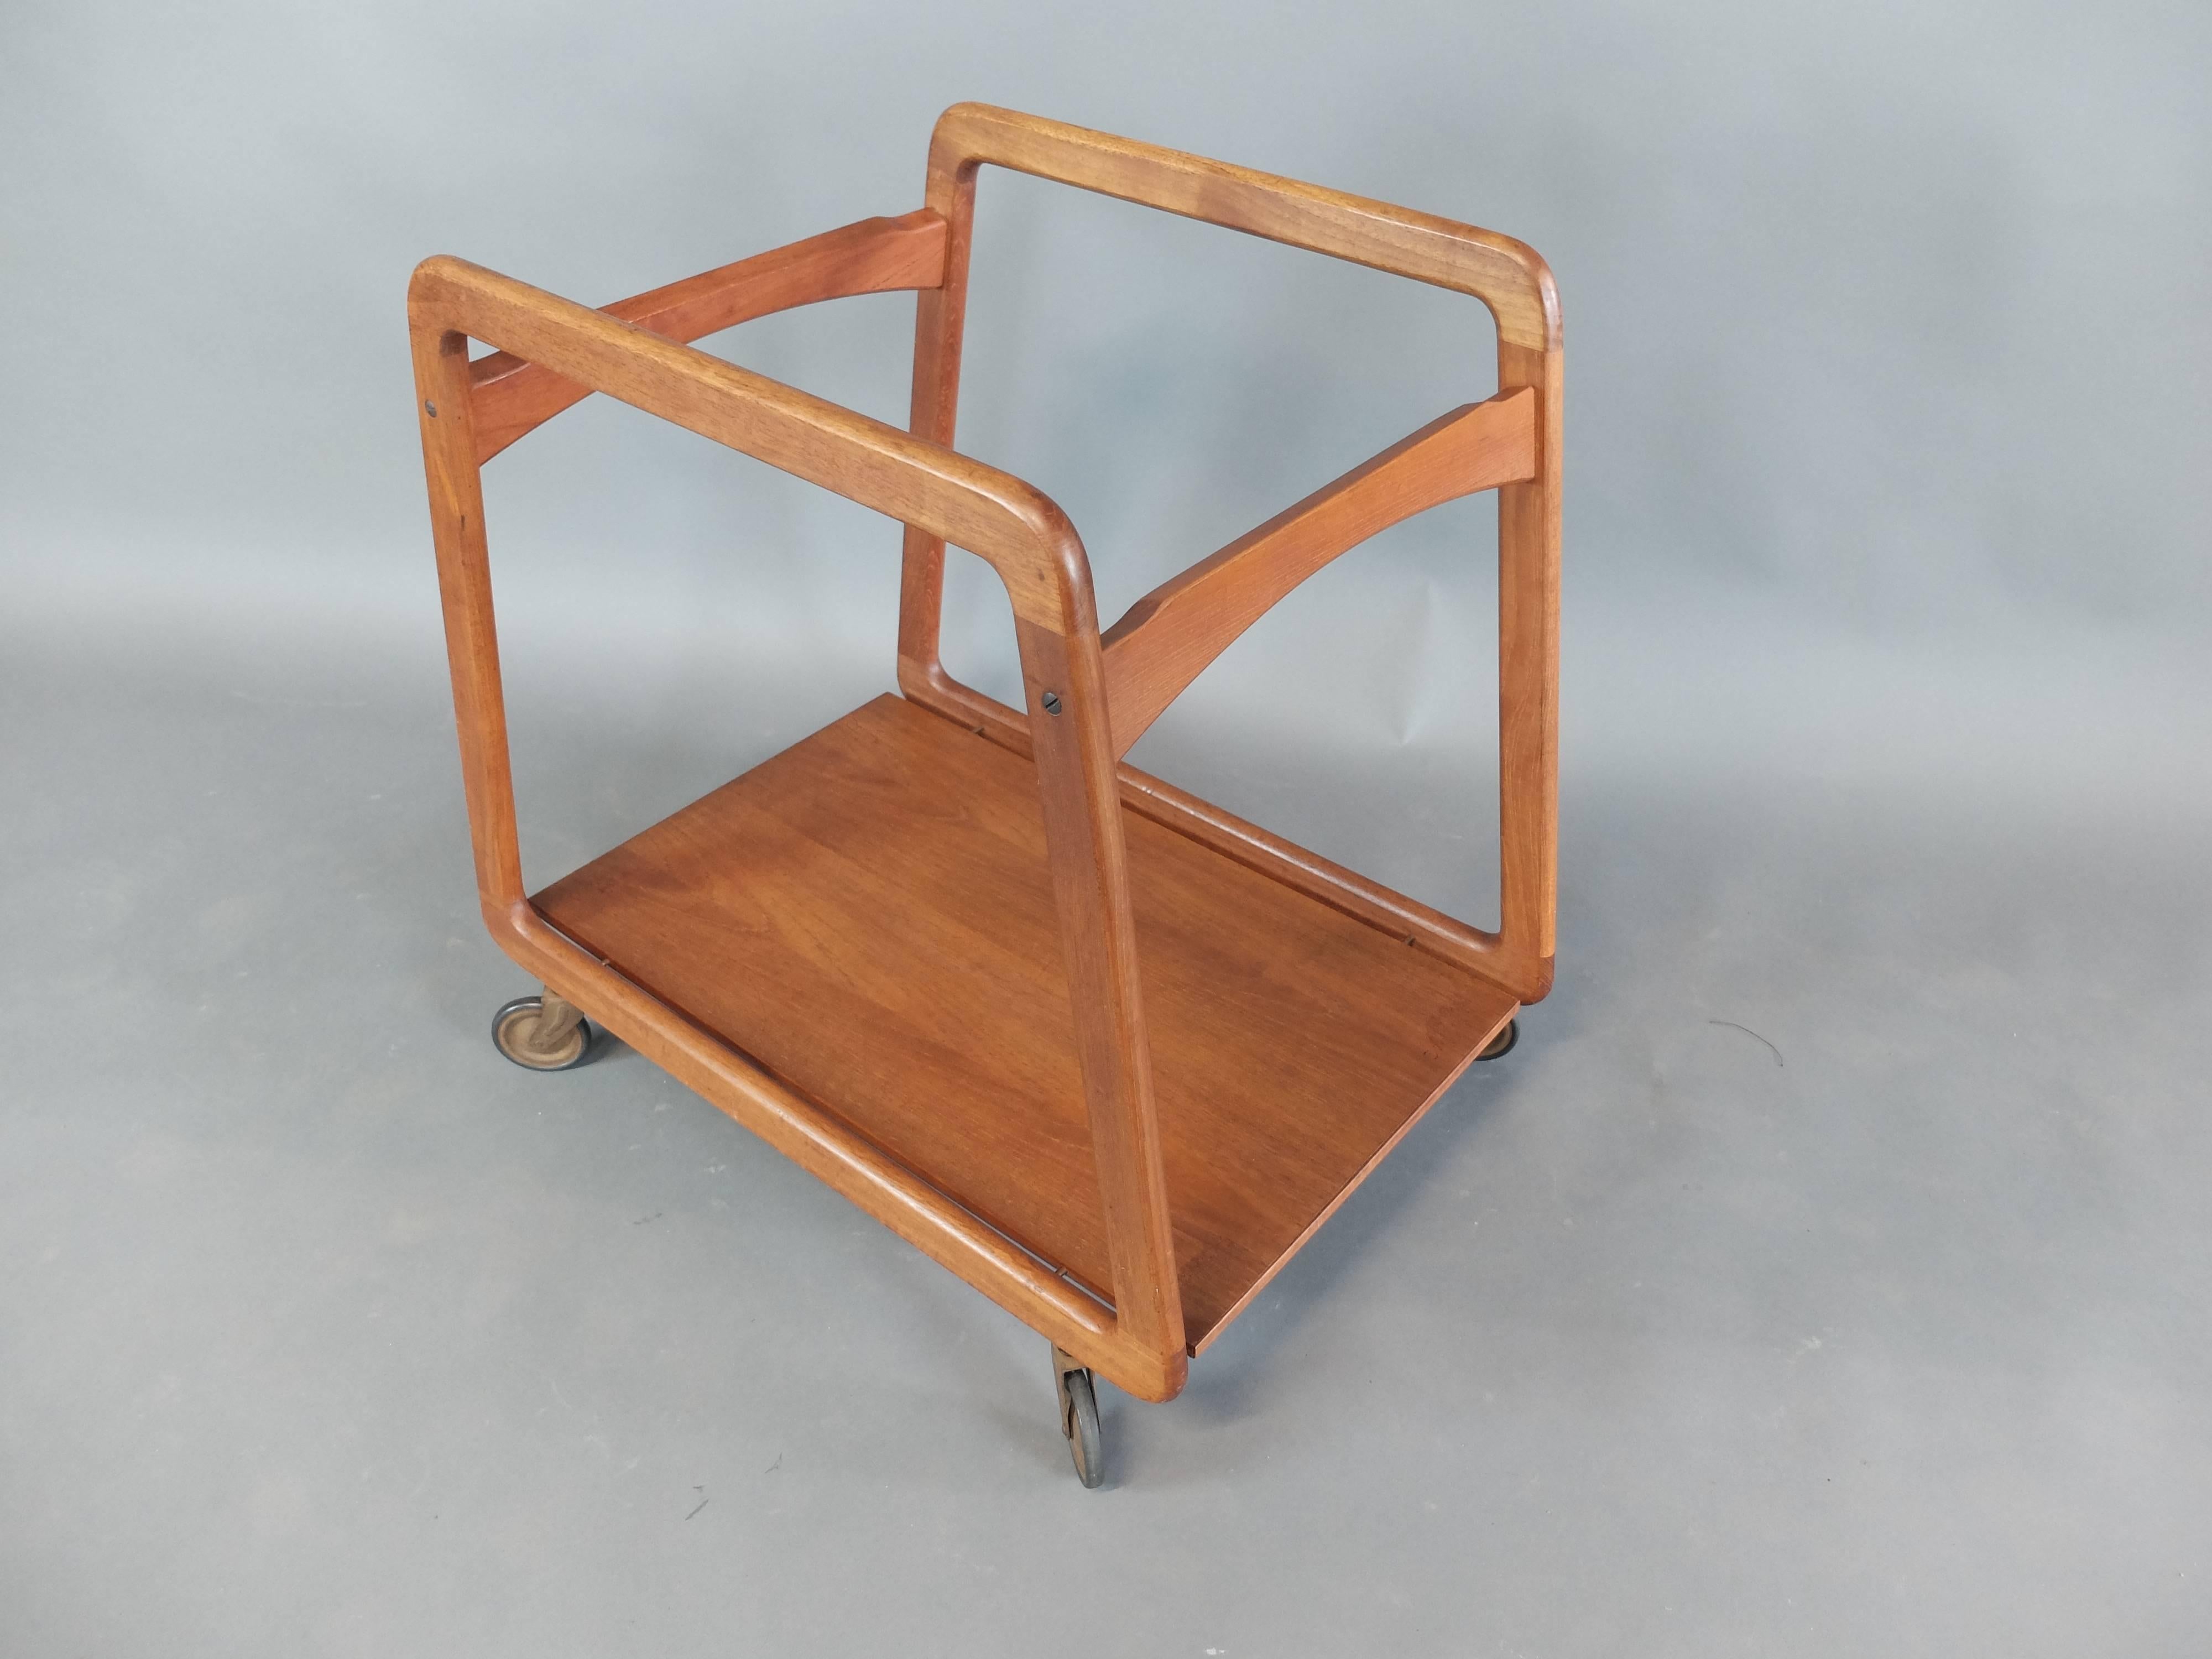 Sika Mobler Danish Teak Drinks Trolley In Good Condition For Sale In Heswall, Wirral